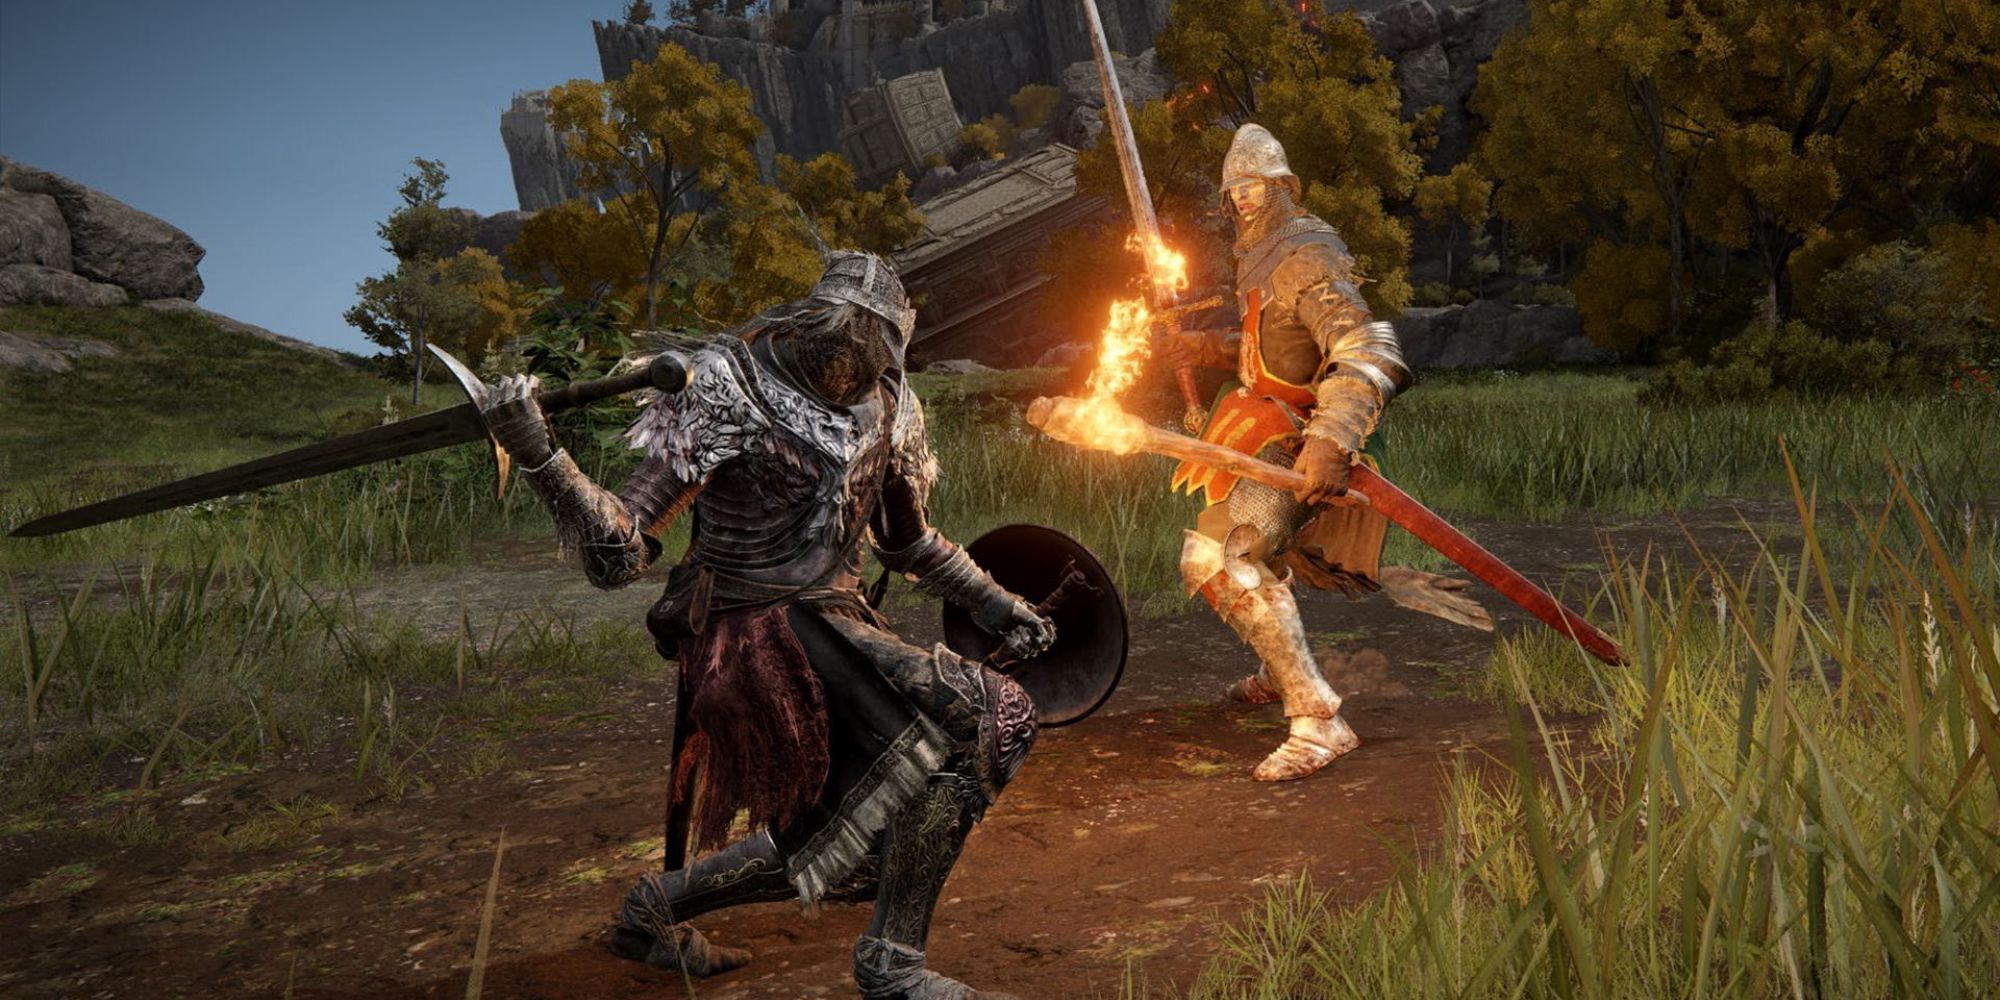 The player does a charge attack against a guard in Lordran in Elden Ring